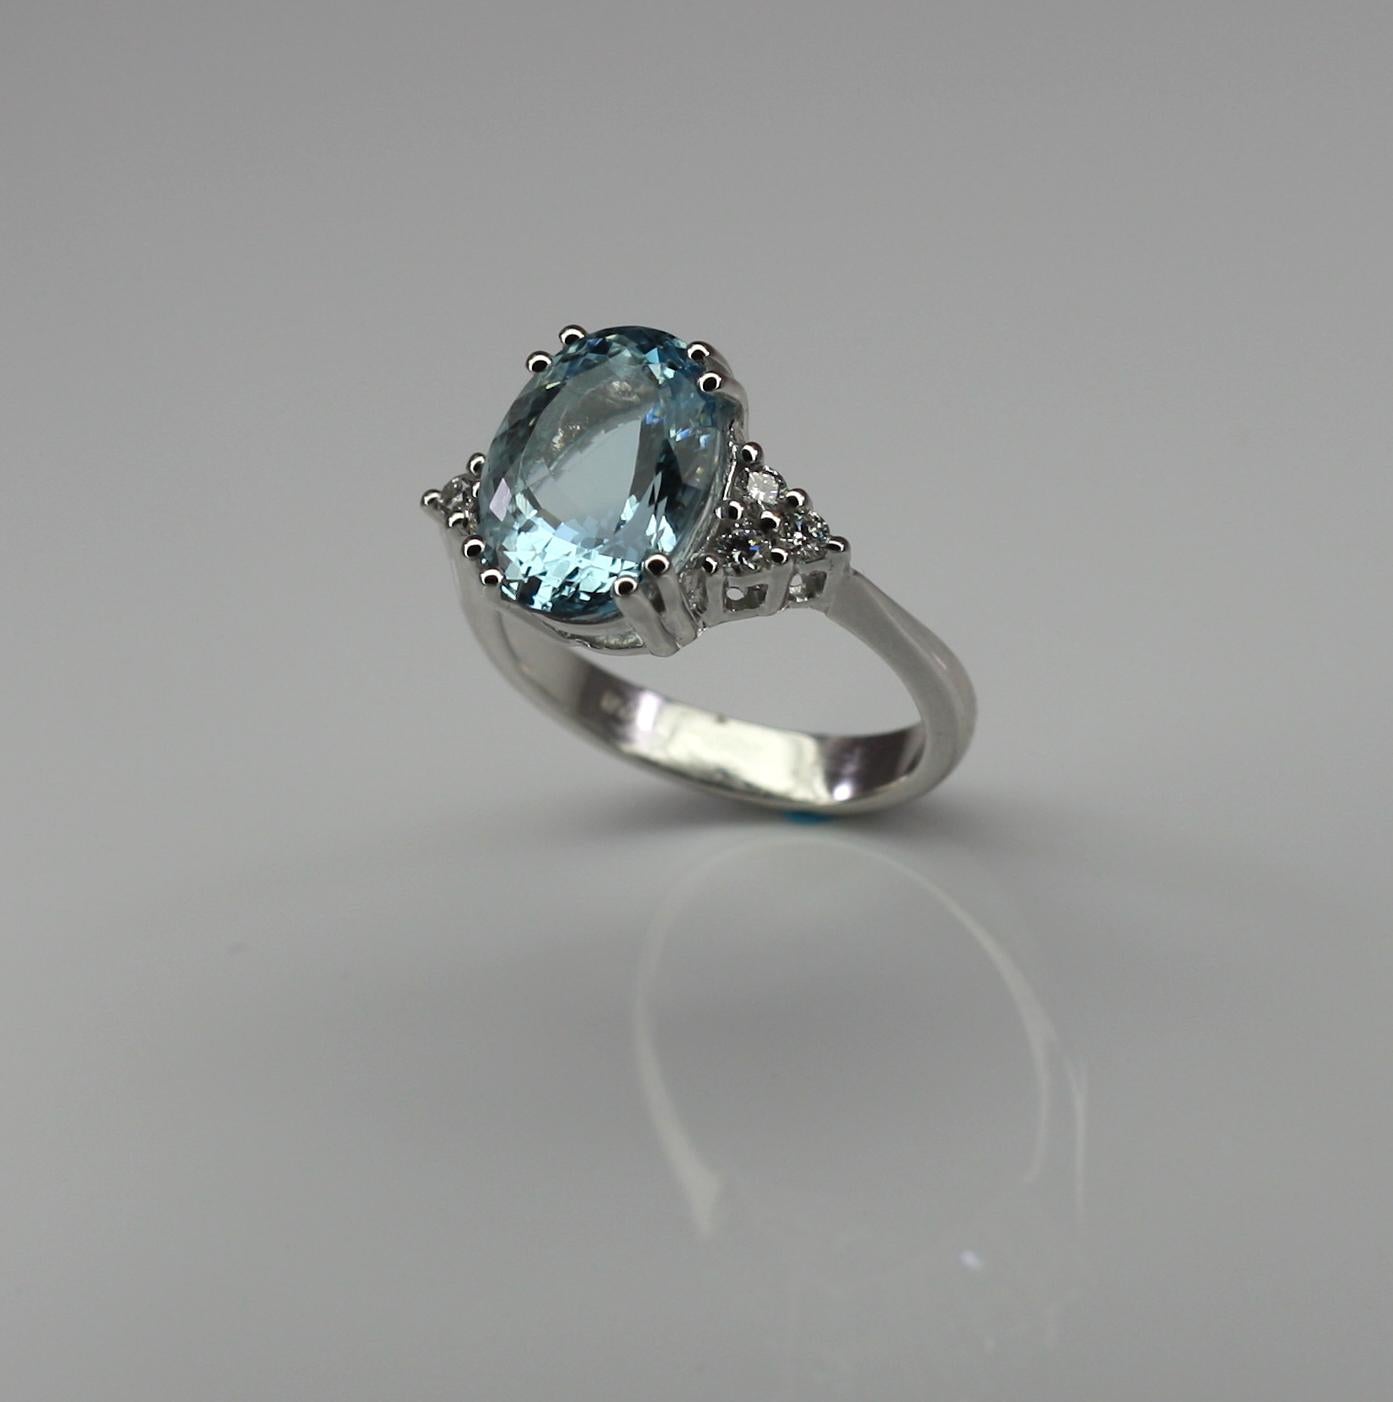 This S.Georgios designer White Gold 18 Karat Ring features a gorgeous Oval shape Aquamarine with a weight of 4.94 Carat. and six (6) Brilliant-cut White Diamonds VS1 -F Color total weight of 0.22 Carat. This stunning classic and super elegant ring